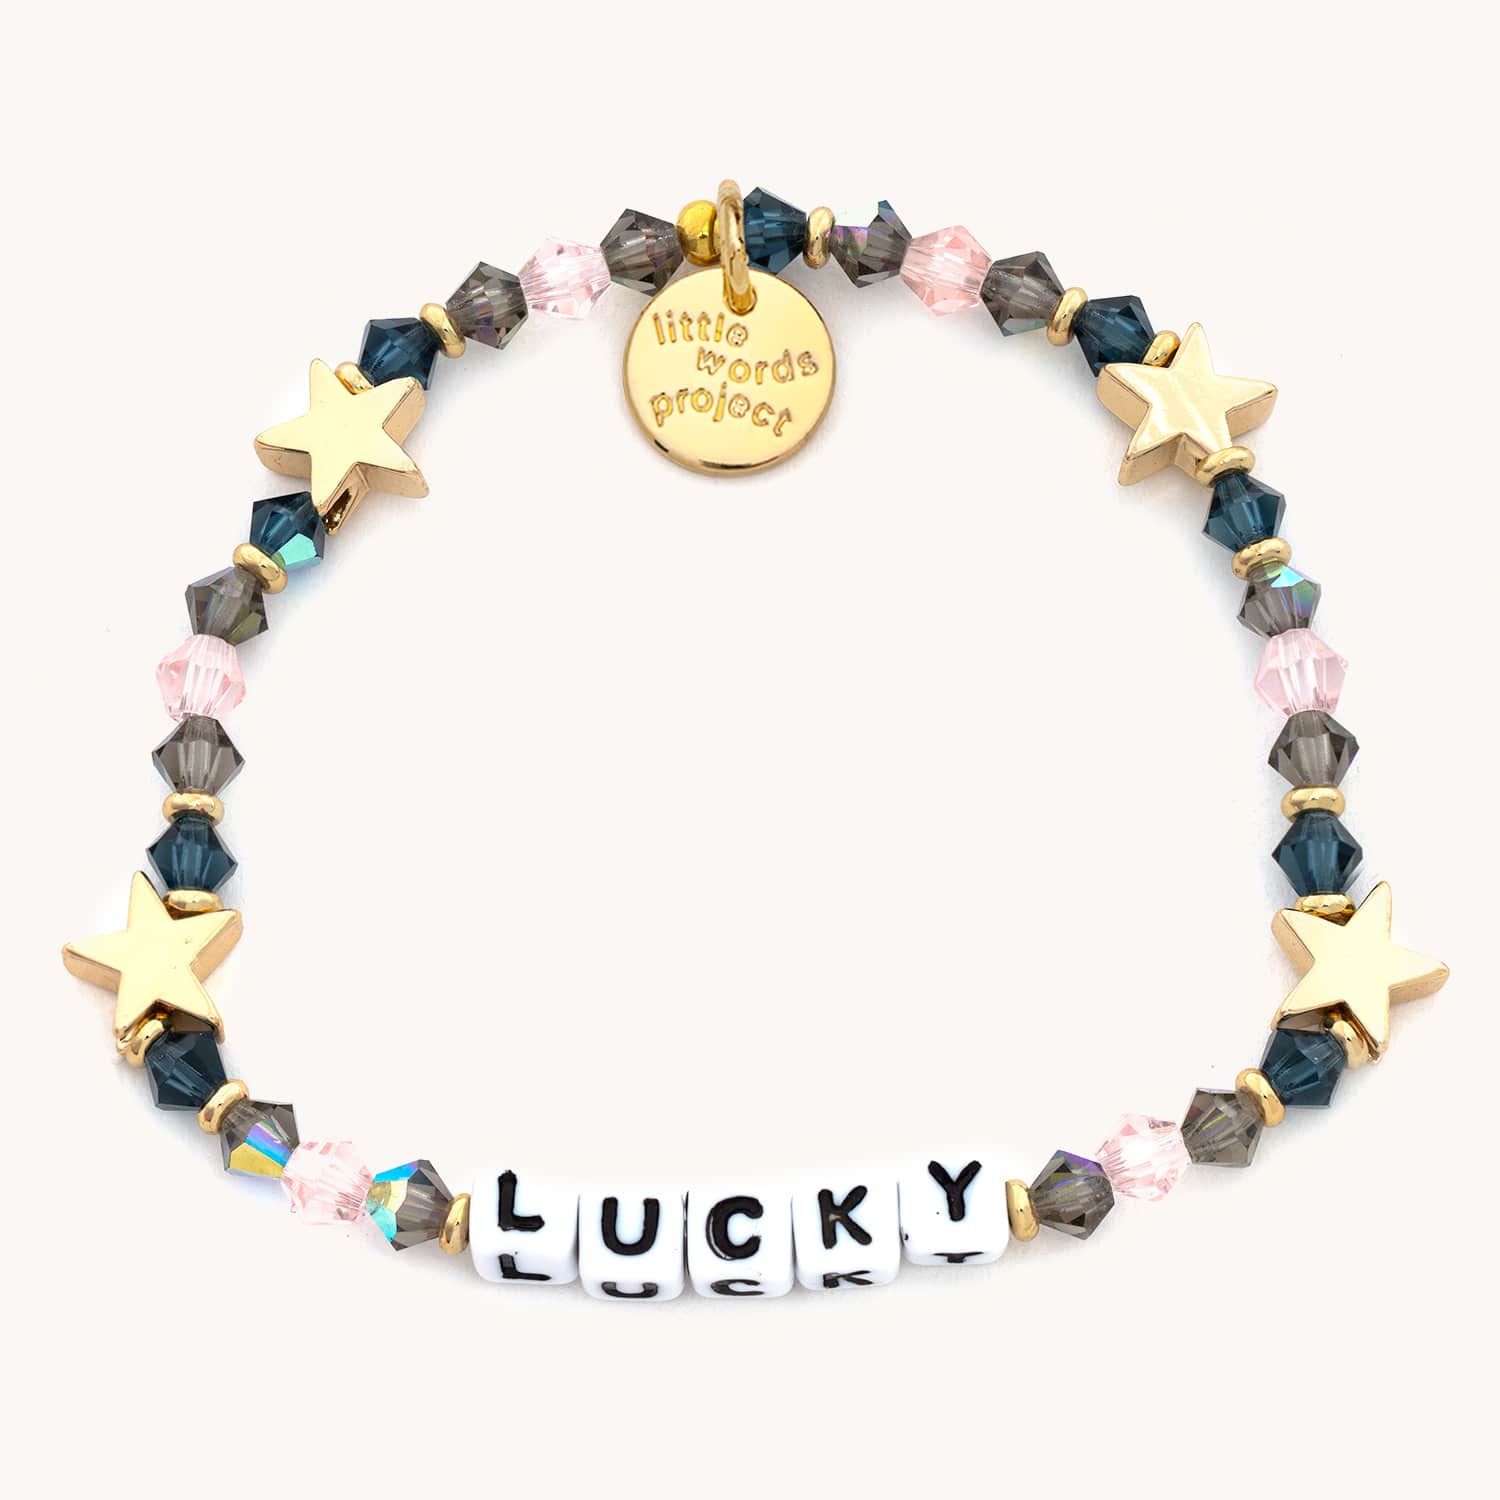 Lucky- Lucky Symbols | Little Words Project